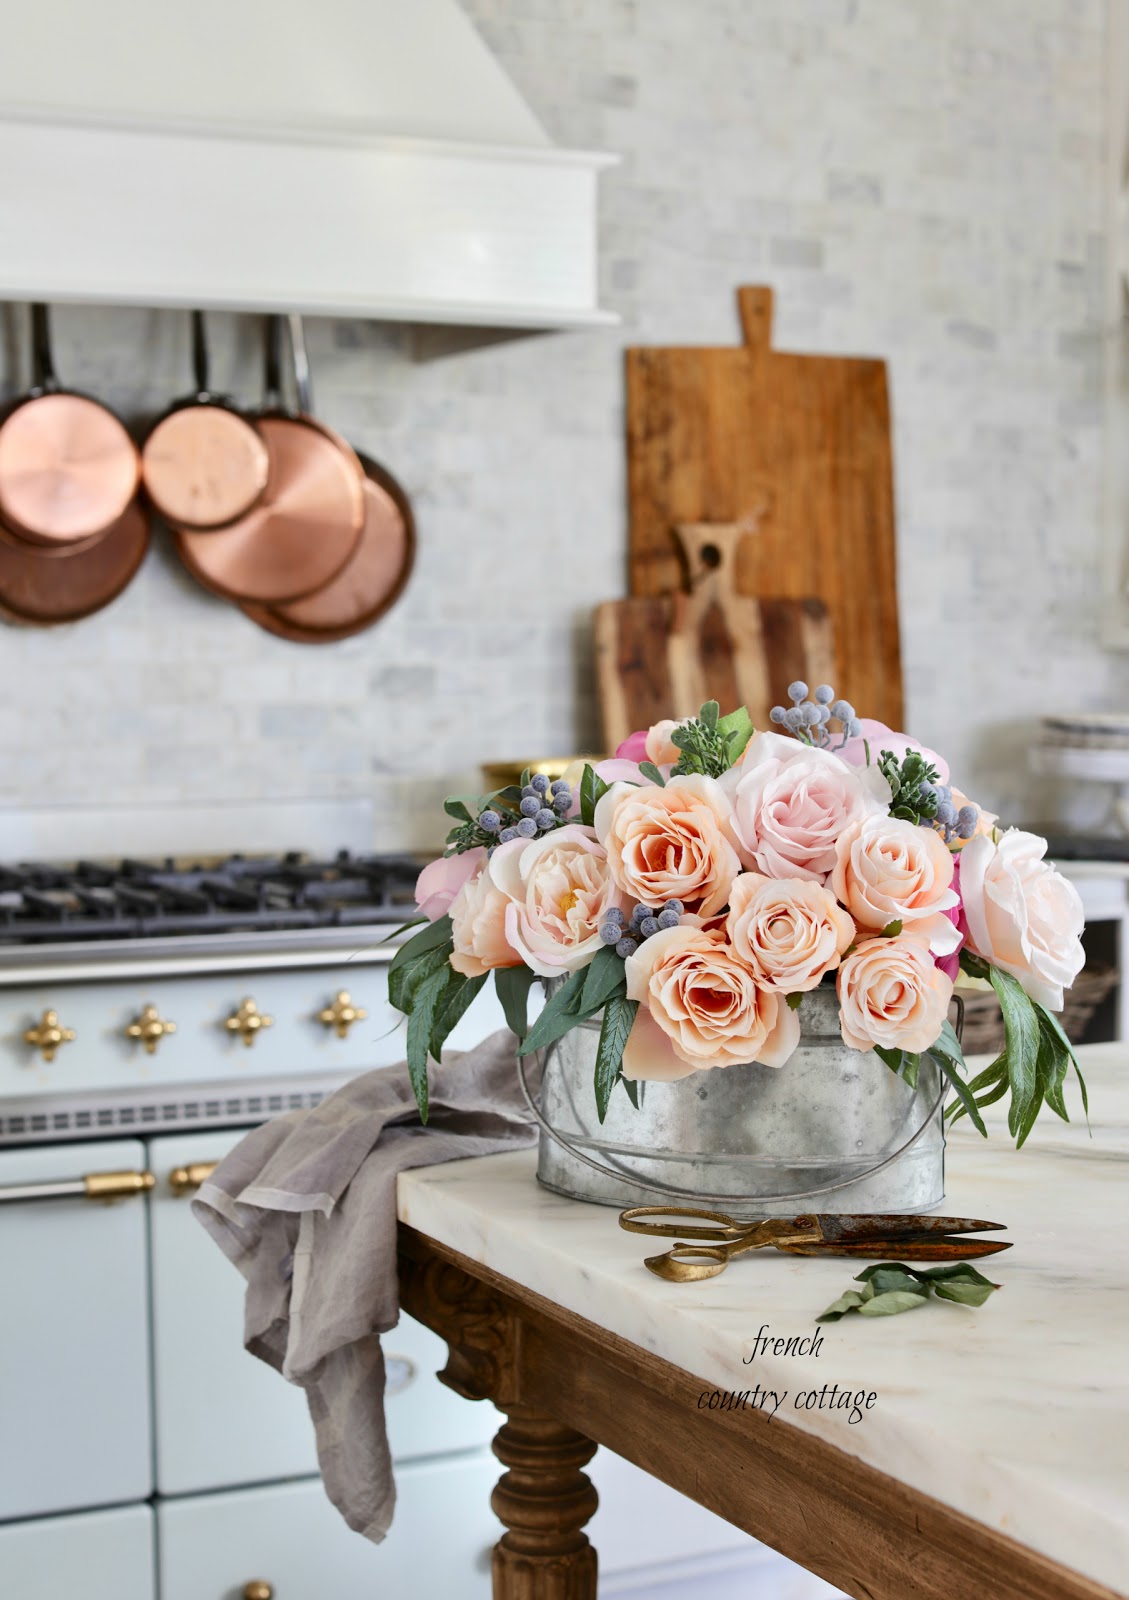 French Country Friday- French Country Cottage Faux Florals